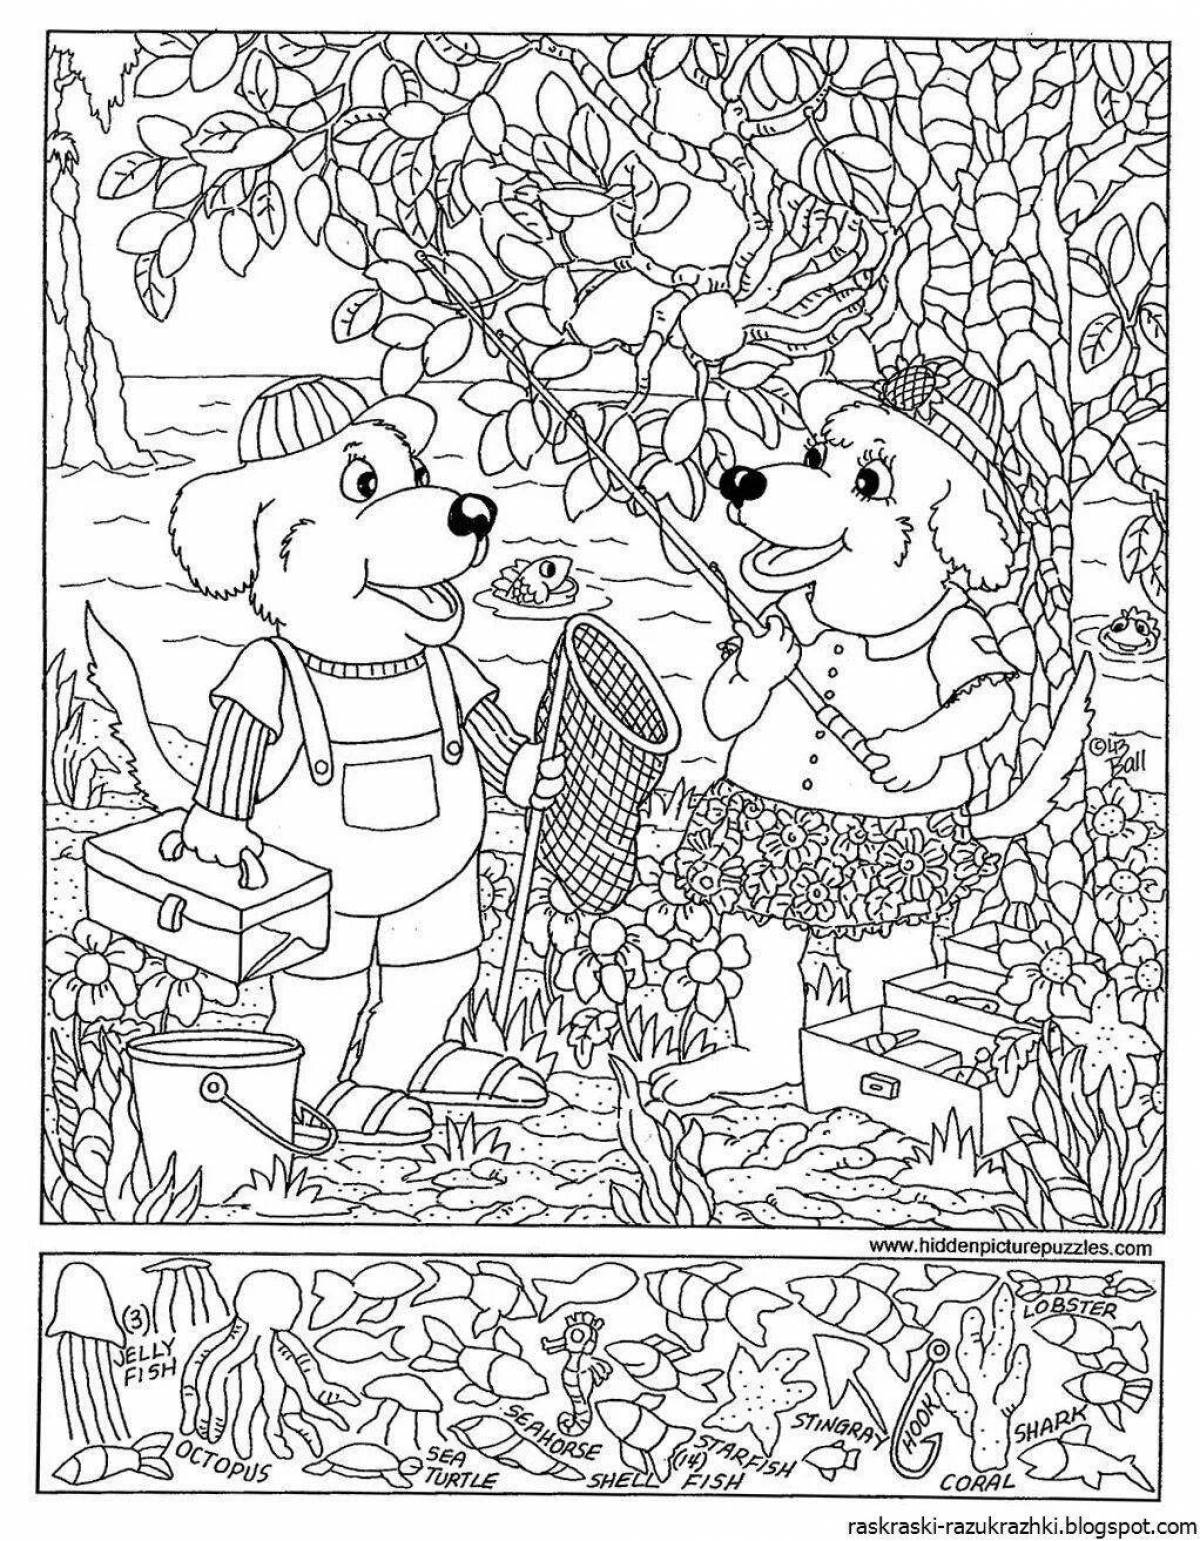 Find the object amazing coloring page